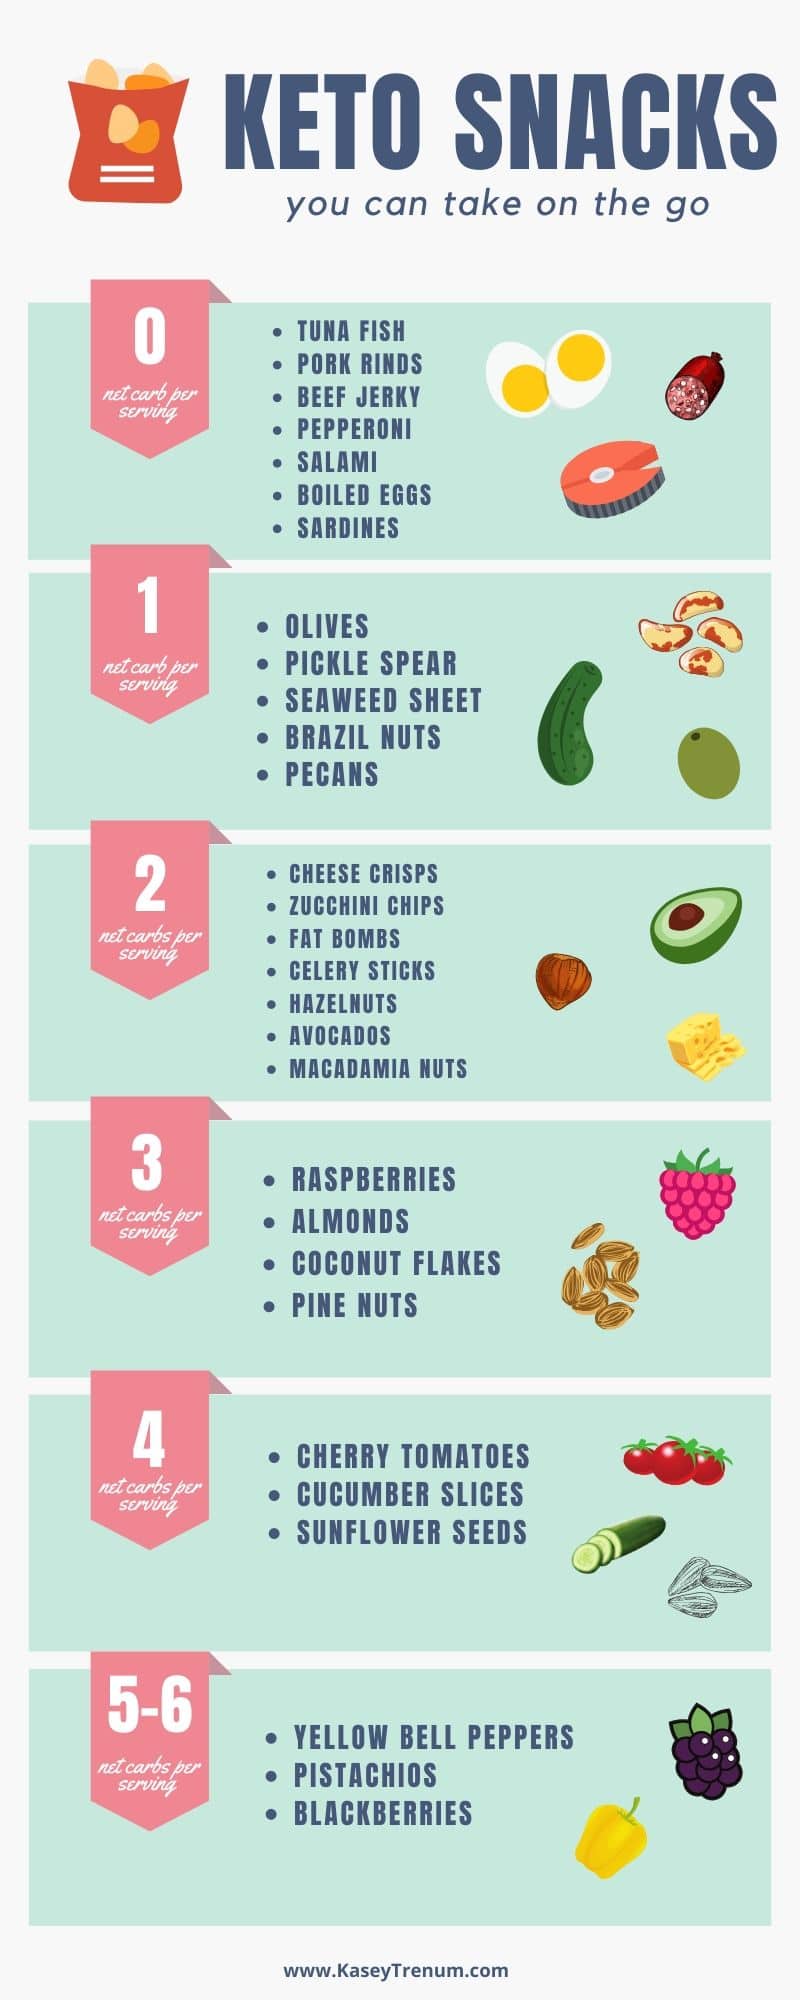 keto snack list infographic with net carbs listed